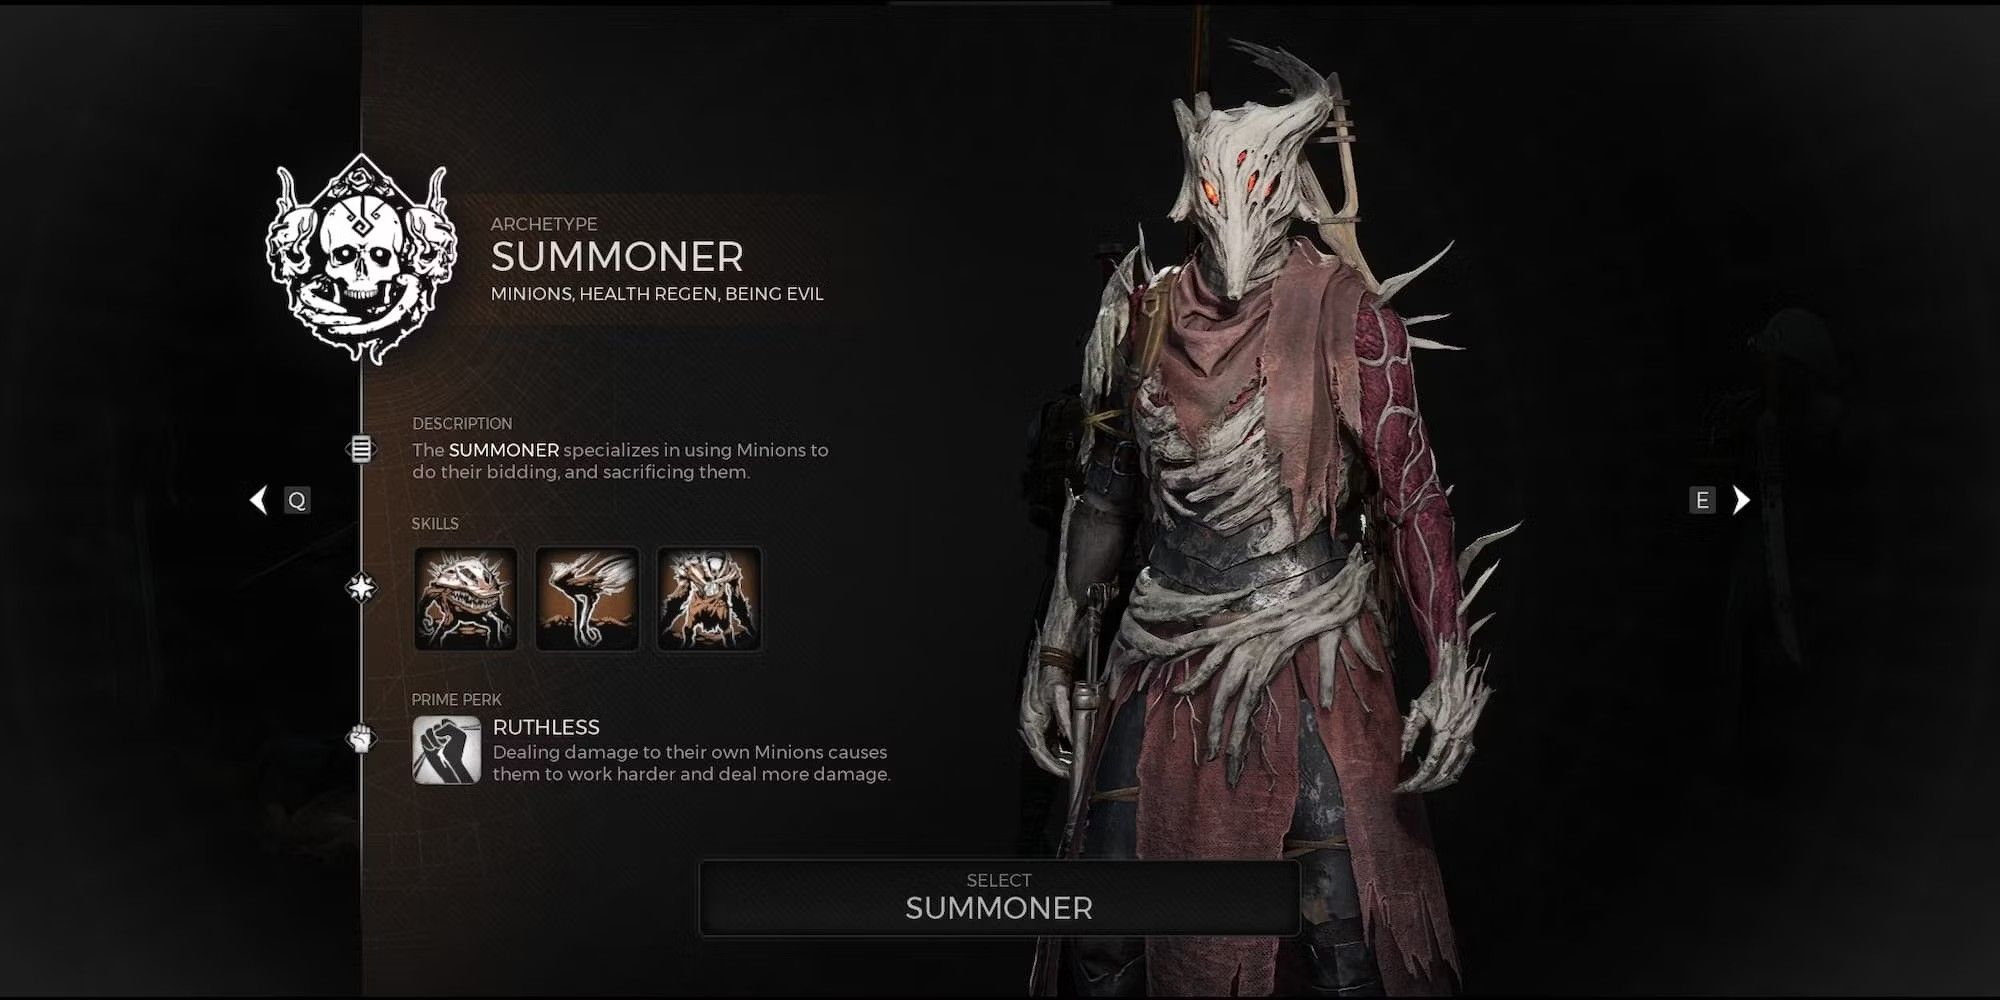 The official introductory page for the Summoner, with the character standing to the side of the screen.